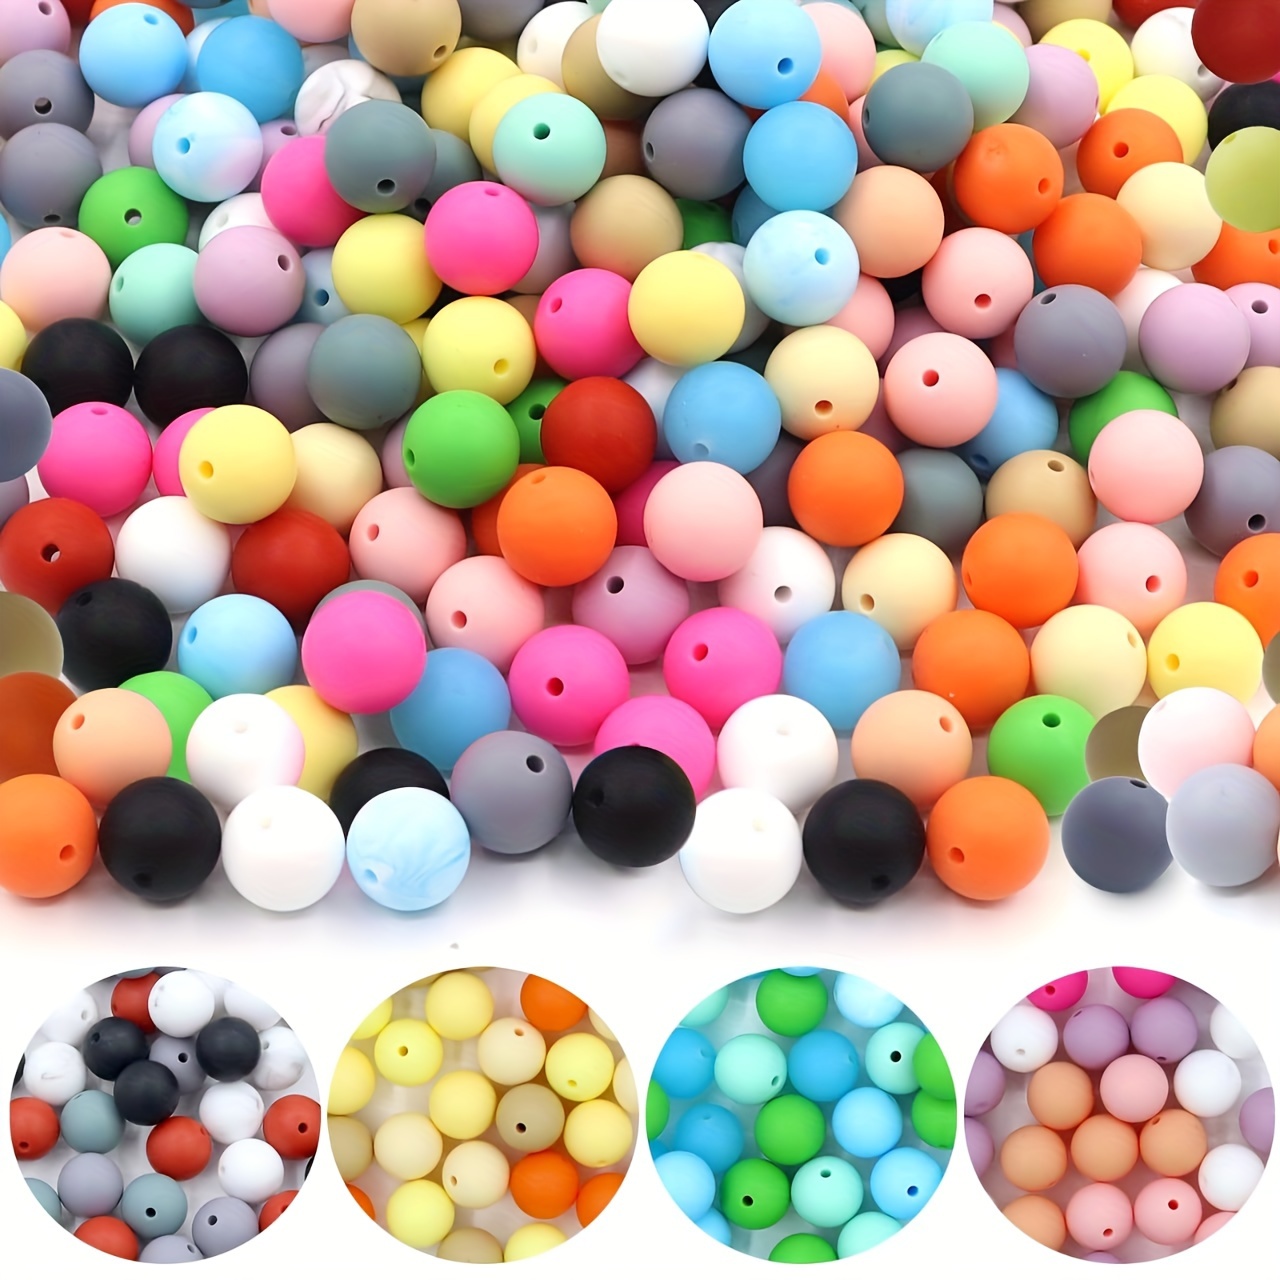 Camo Print Silicone Beads, Mixed Lot Silicone Round Beads, DIY Necklace  Jewelry Making, Handcrafts Beads, 12/15mm Silicone Beads Bulk 